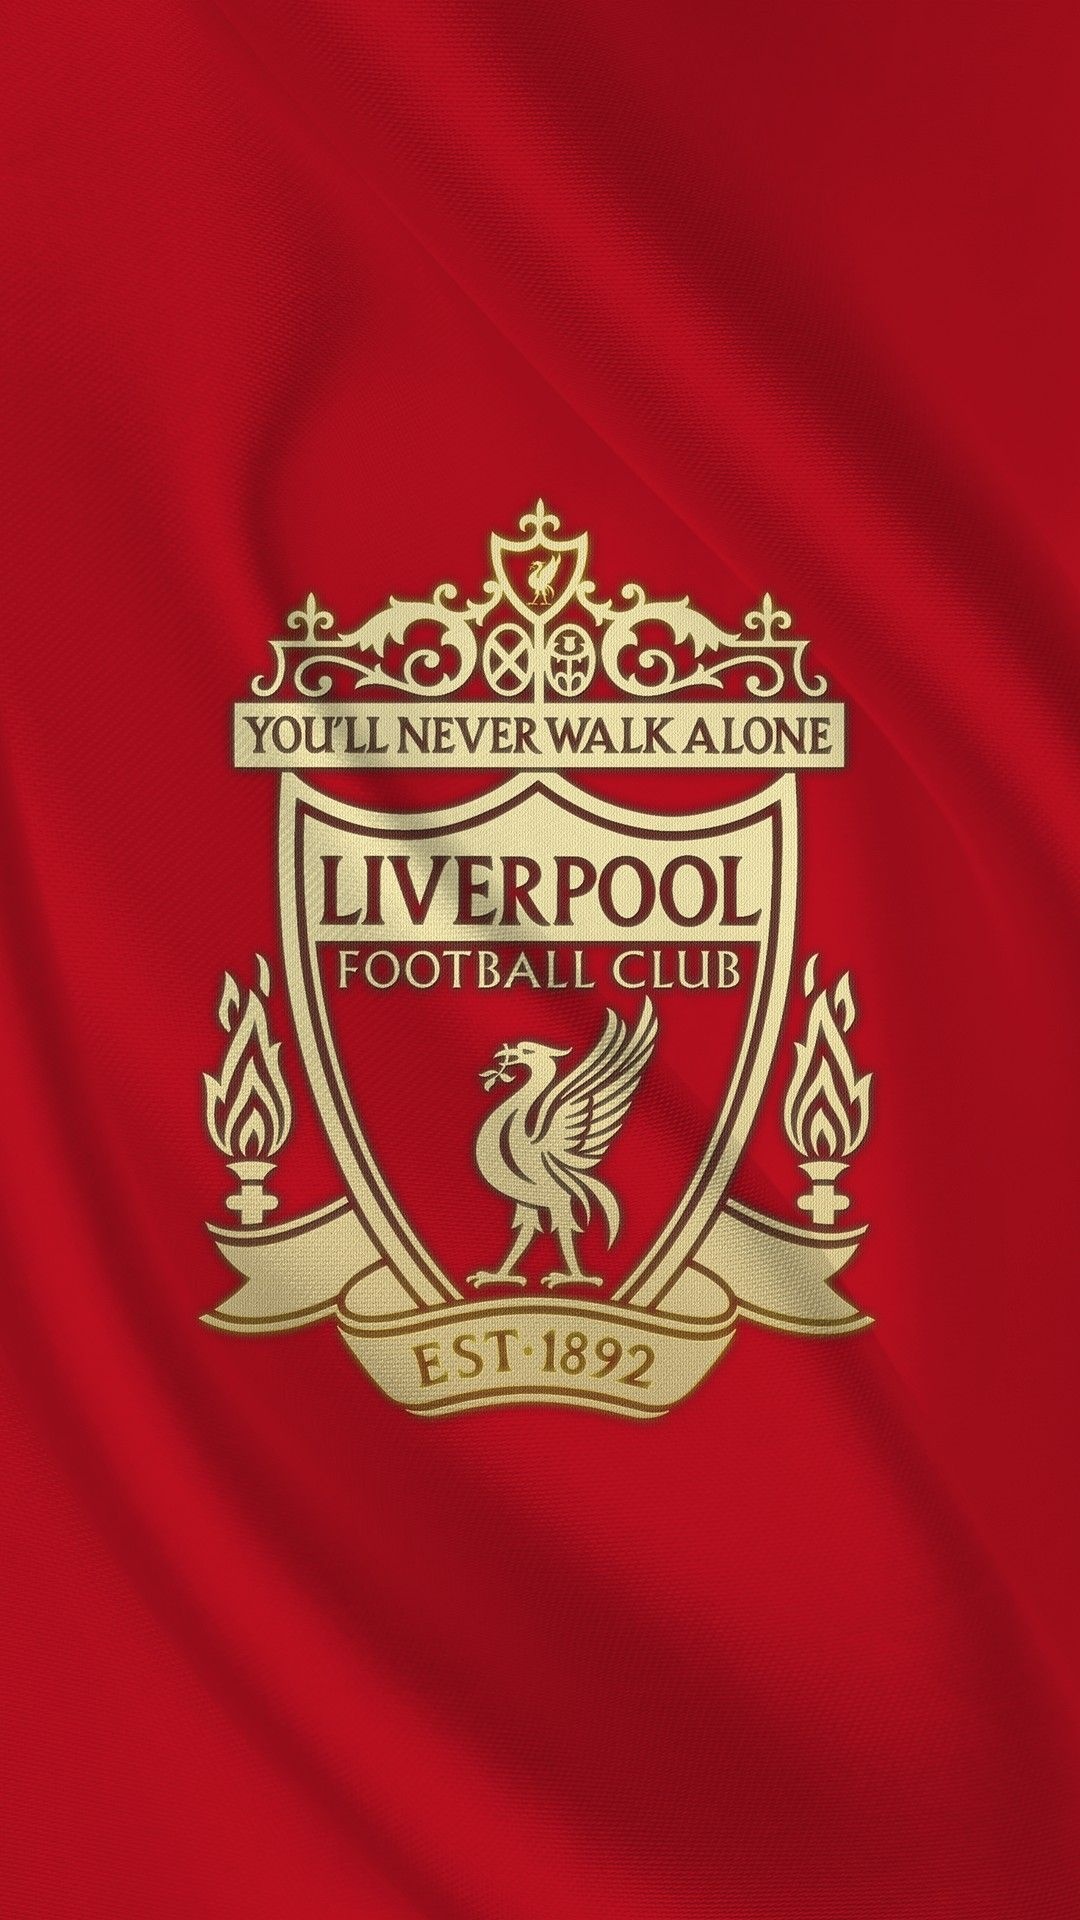 Liverpool Football Club: Won the European Champion Clubs' Cup trophy outright and were awarded a multiple winner badge. 1080x1920 Full HD Wallpaper.